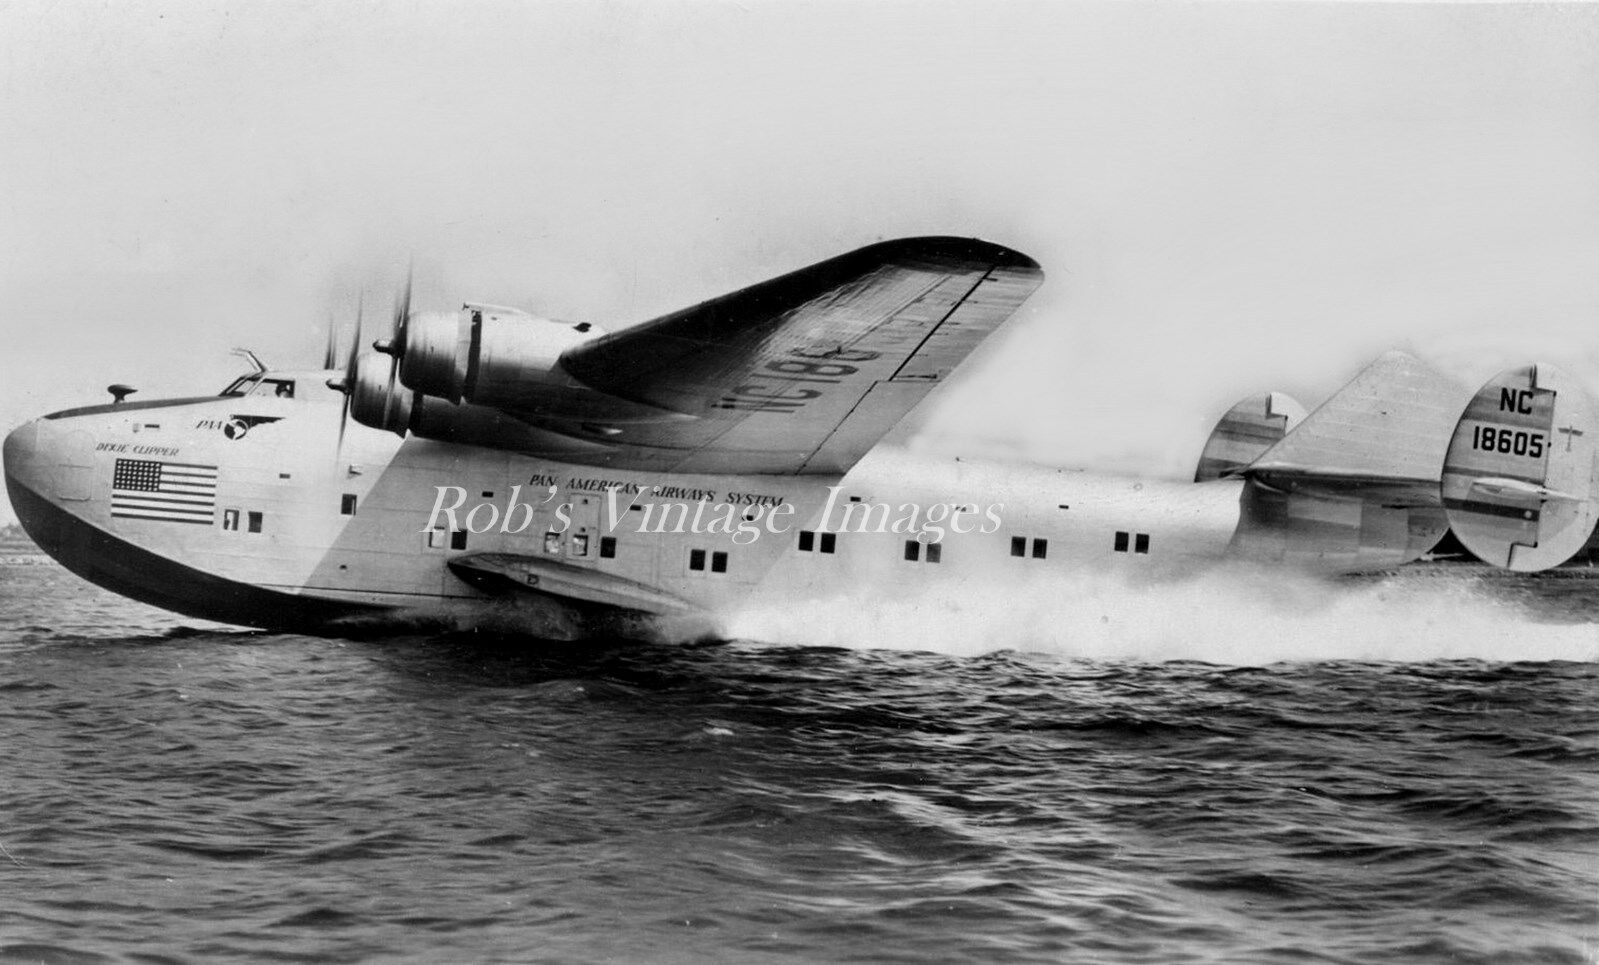  Pan Am Clipper  Boeing 314 18605 Photo Dixie Clipper Airplane Flying Boat 1941 